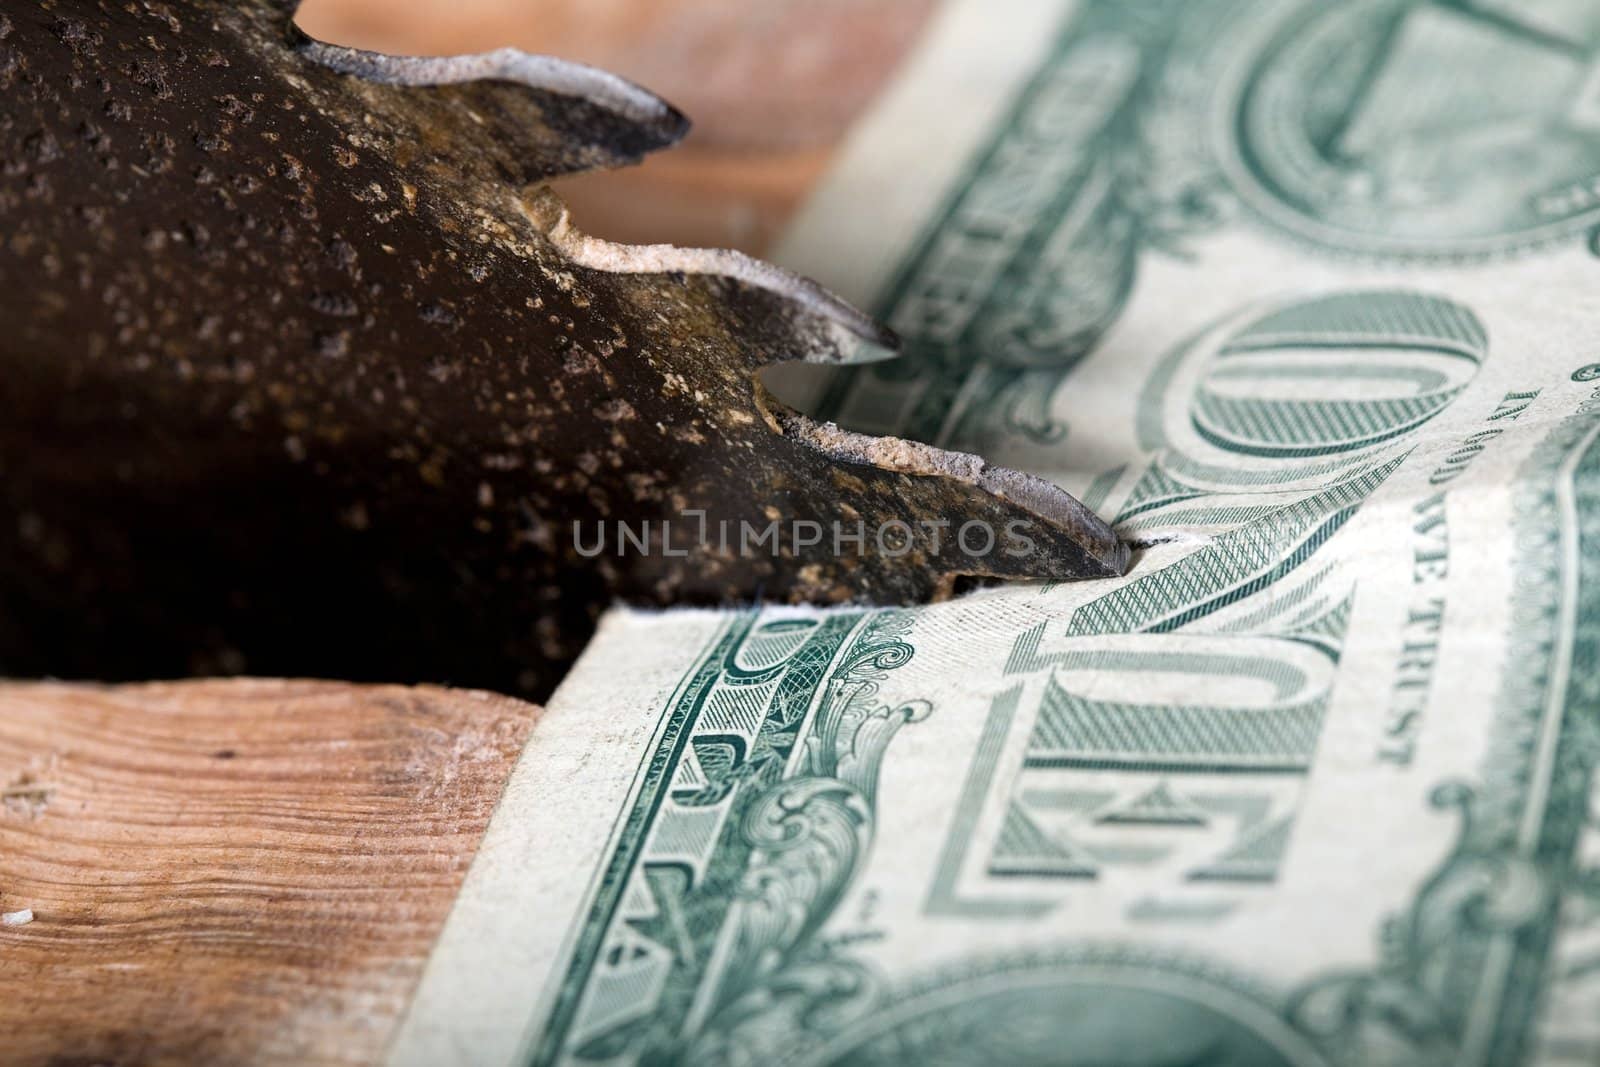 An image of a saw and one dollar